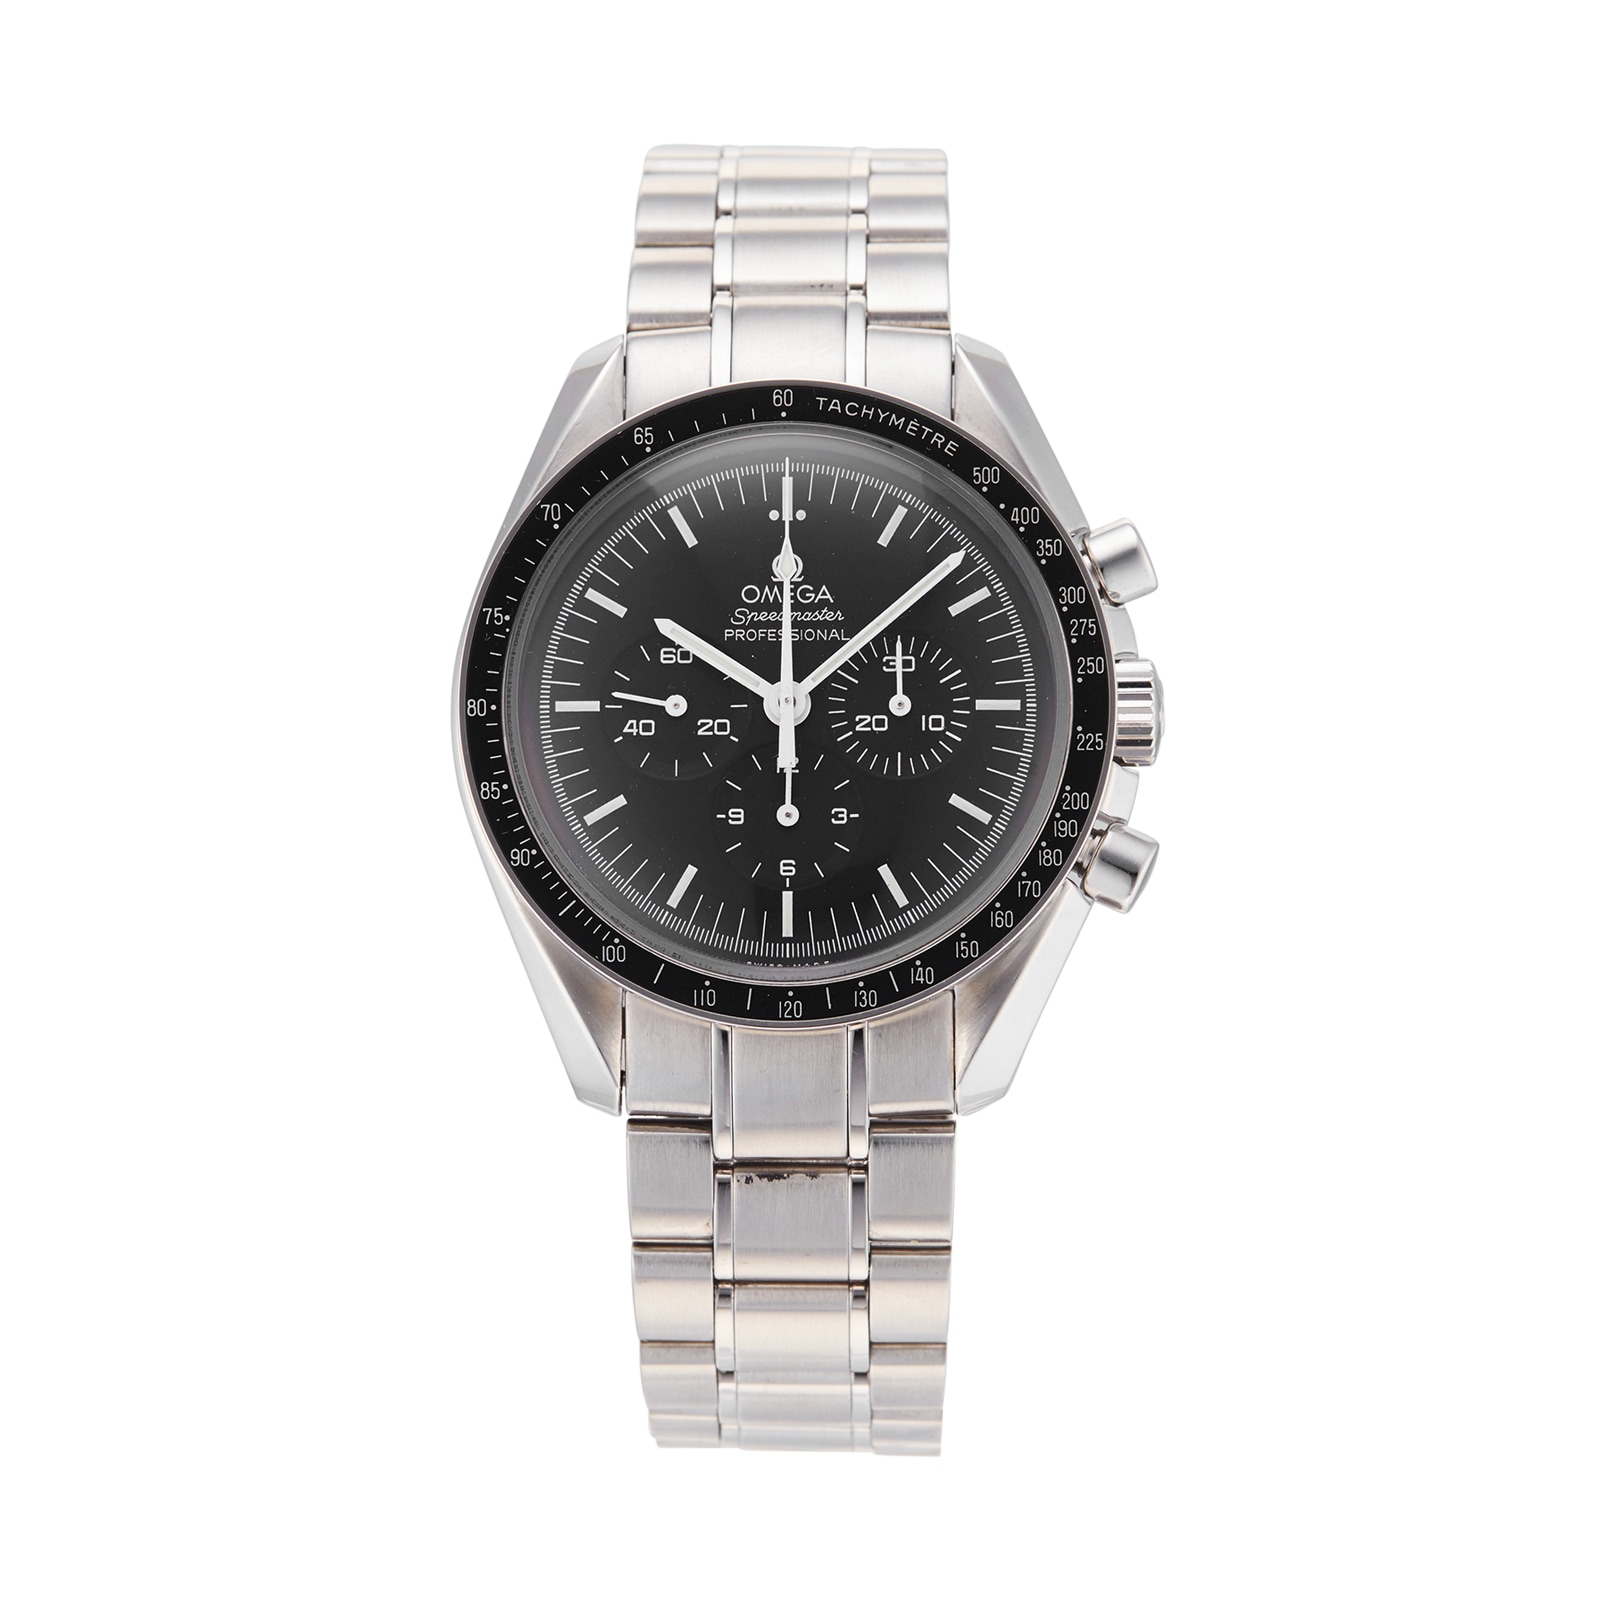 Pre-Owned OMEGA Speedmaster Moonwatch Chronograph 42 Mens Watch 3570.50.00